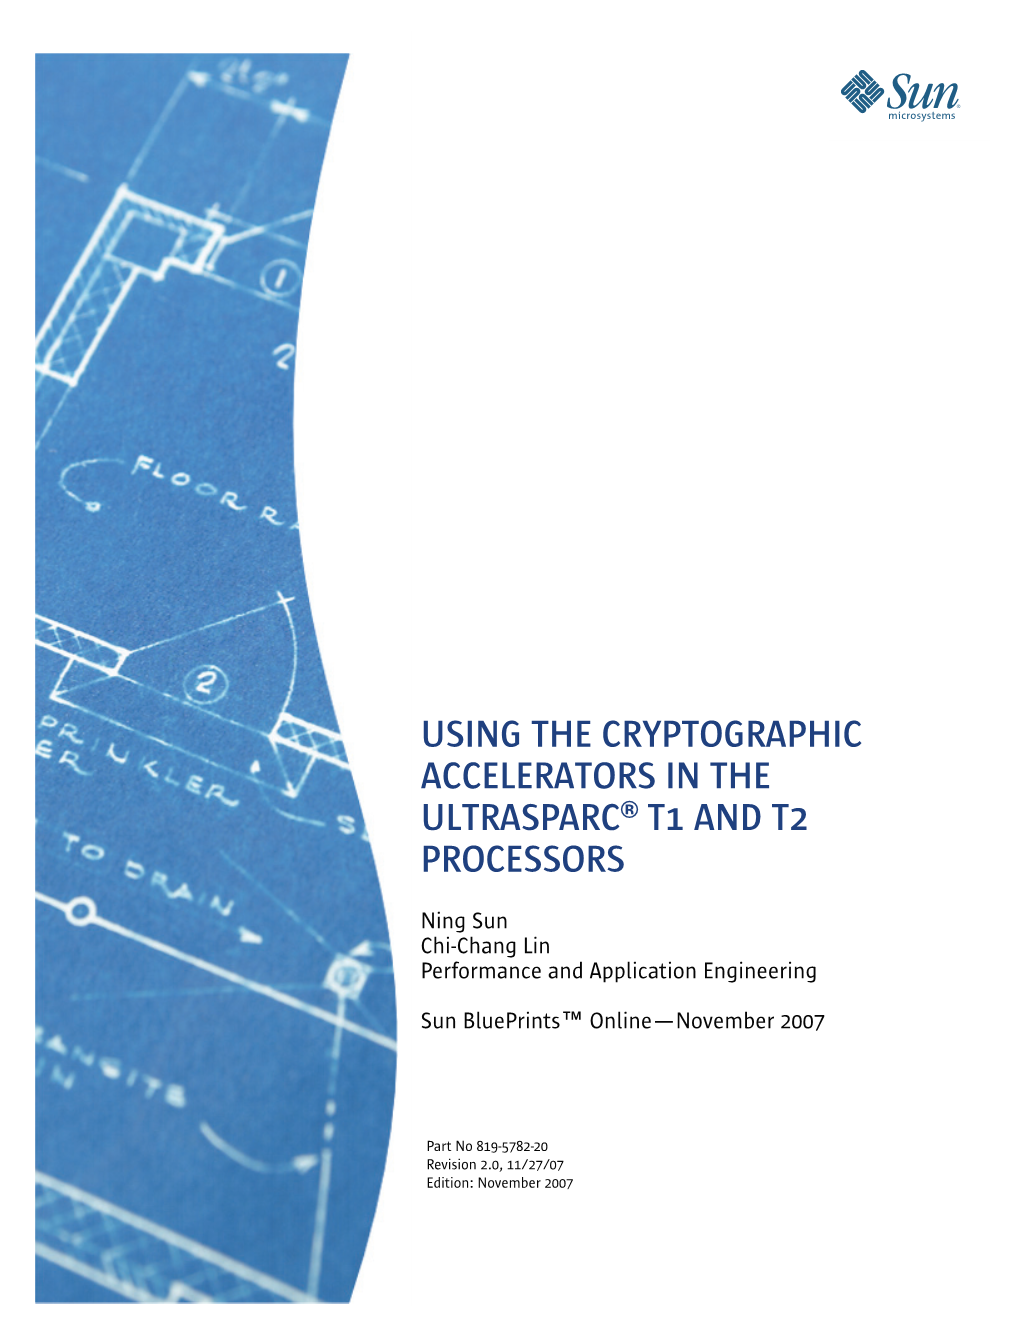 Using the Cryptographic Accelerators in the Ultrasparc® T1 and T2 Processors